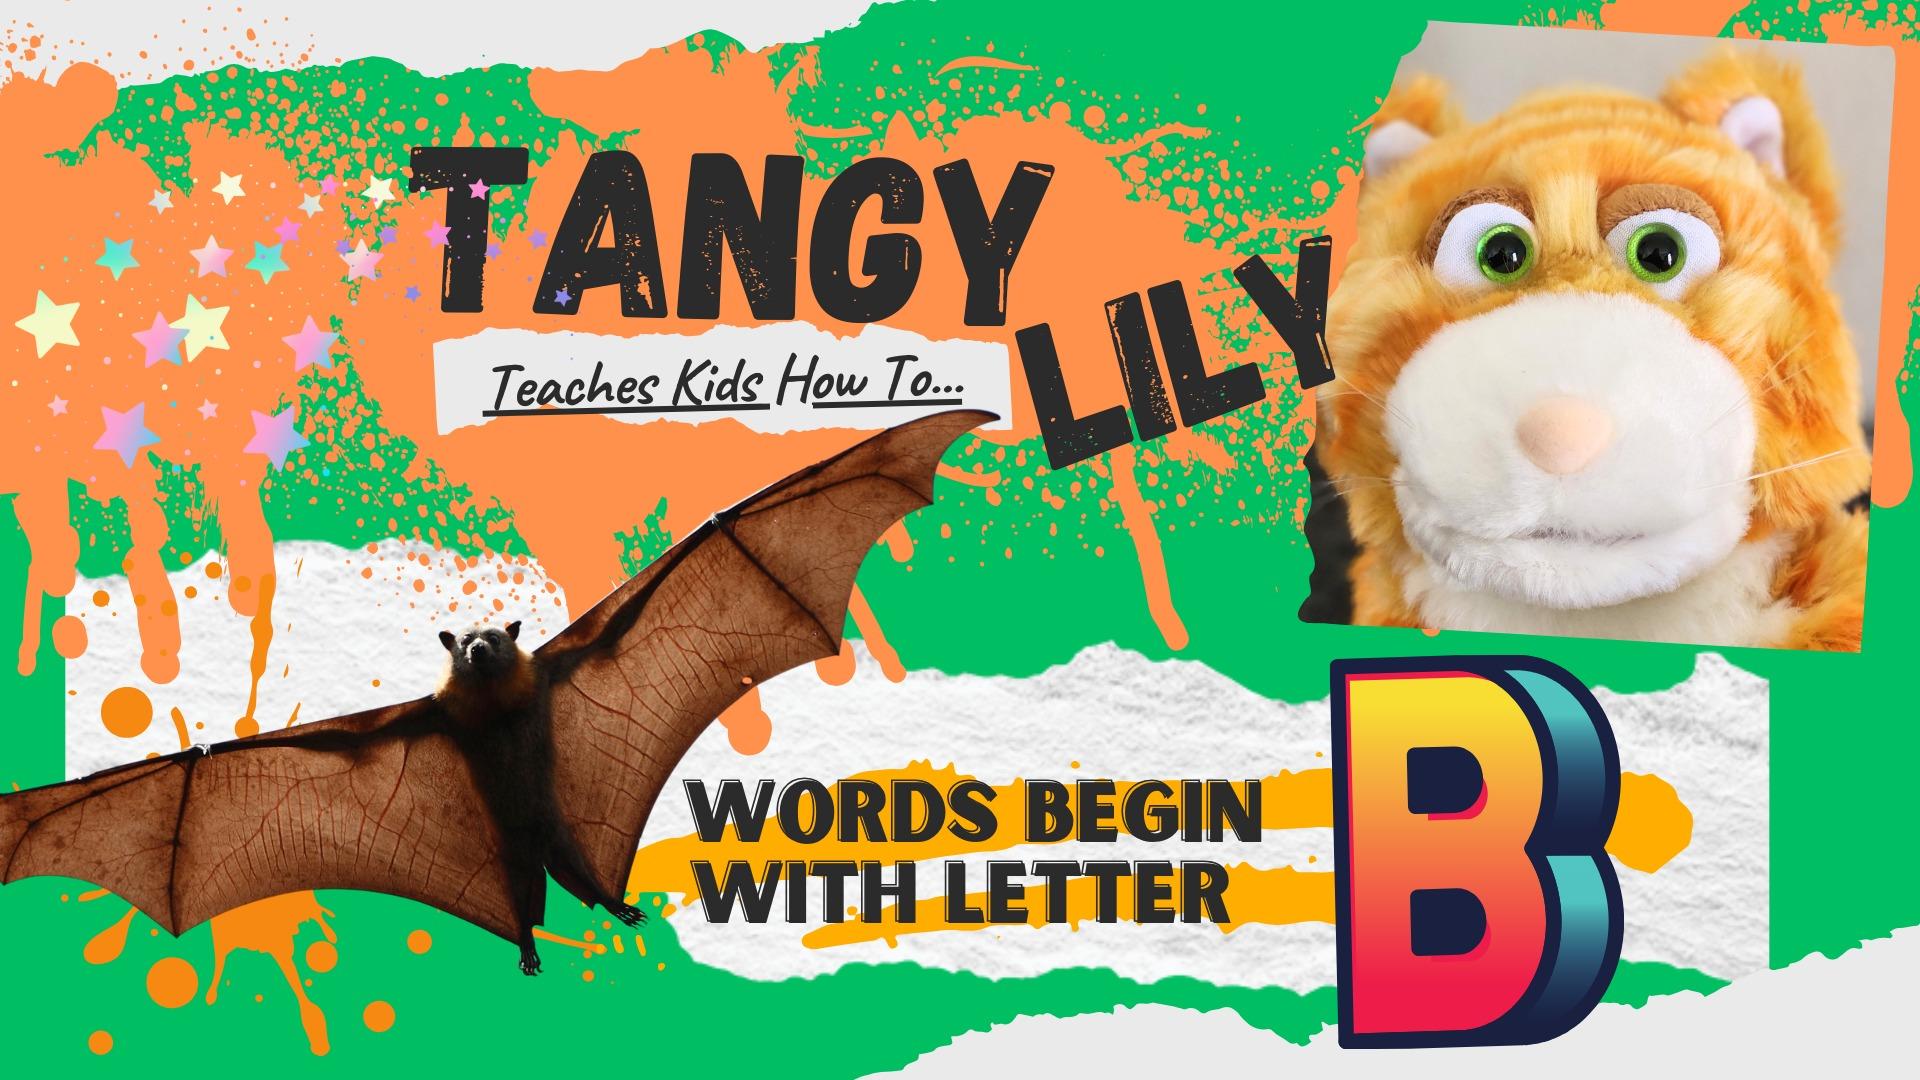 What Words Start With The Letter B? Real Life Animals And Objects